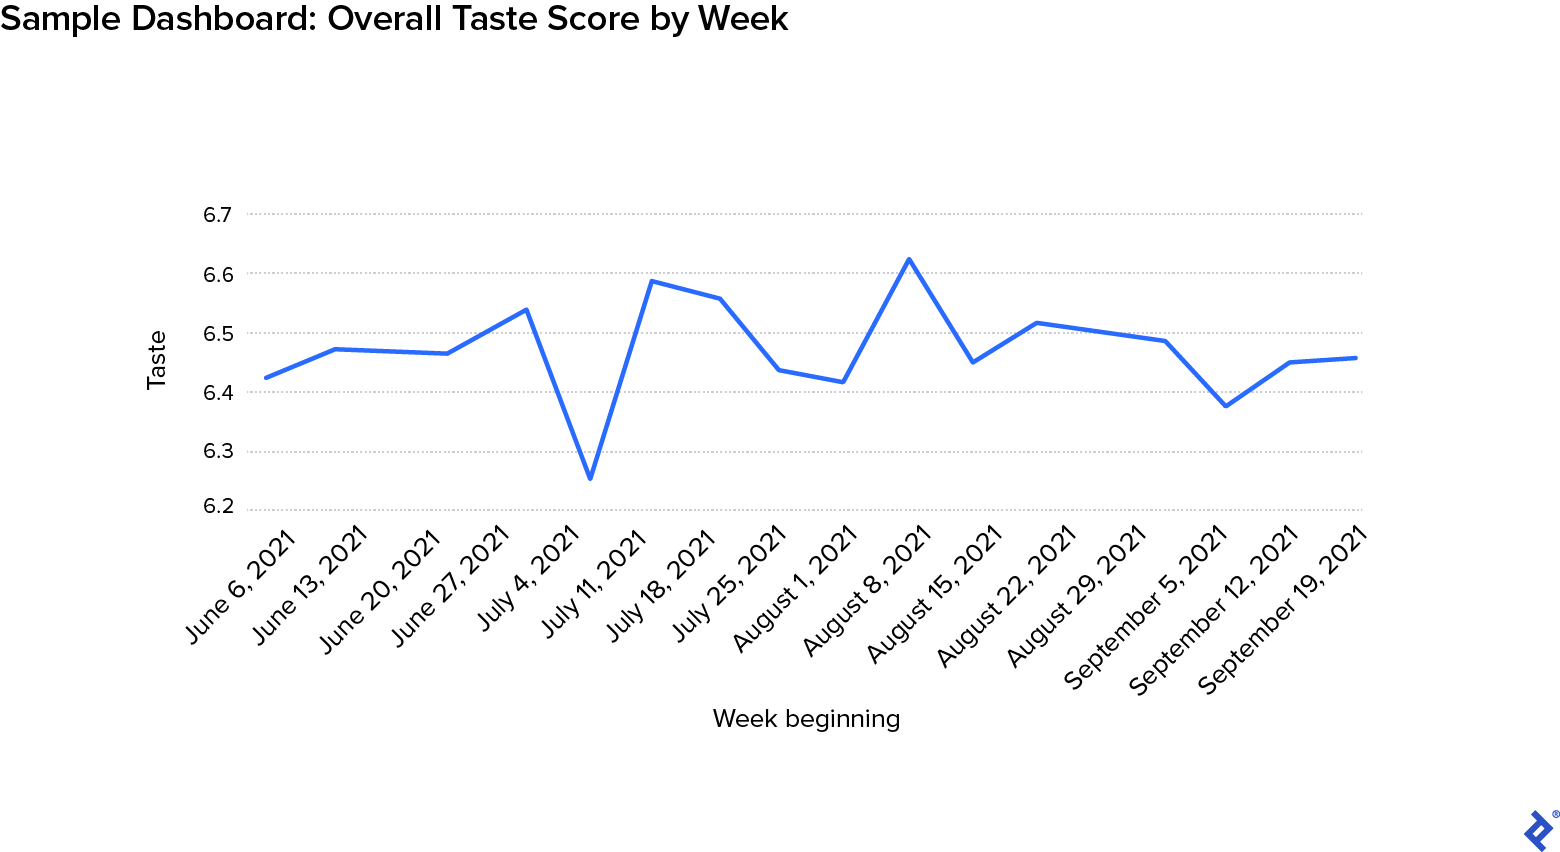 A graph titled Sample Dashboard: Overall Taste Score by Week shows simulated data. On the vertical axis is the taste metric, running from 6.2 to 6.7. On the horizontal axis are dates representing weeks, ranging from June 6, 2021, to September 19, 2021. The data points plotted are relatively consistent, between 6.4 and 6.6, with the exception of the week of July 4, for which there is a sharp dip in the taste metric plotted below 6.3.